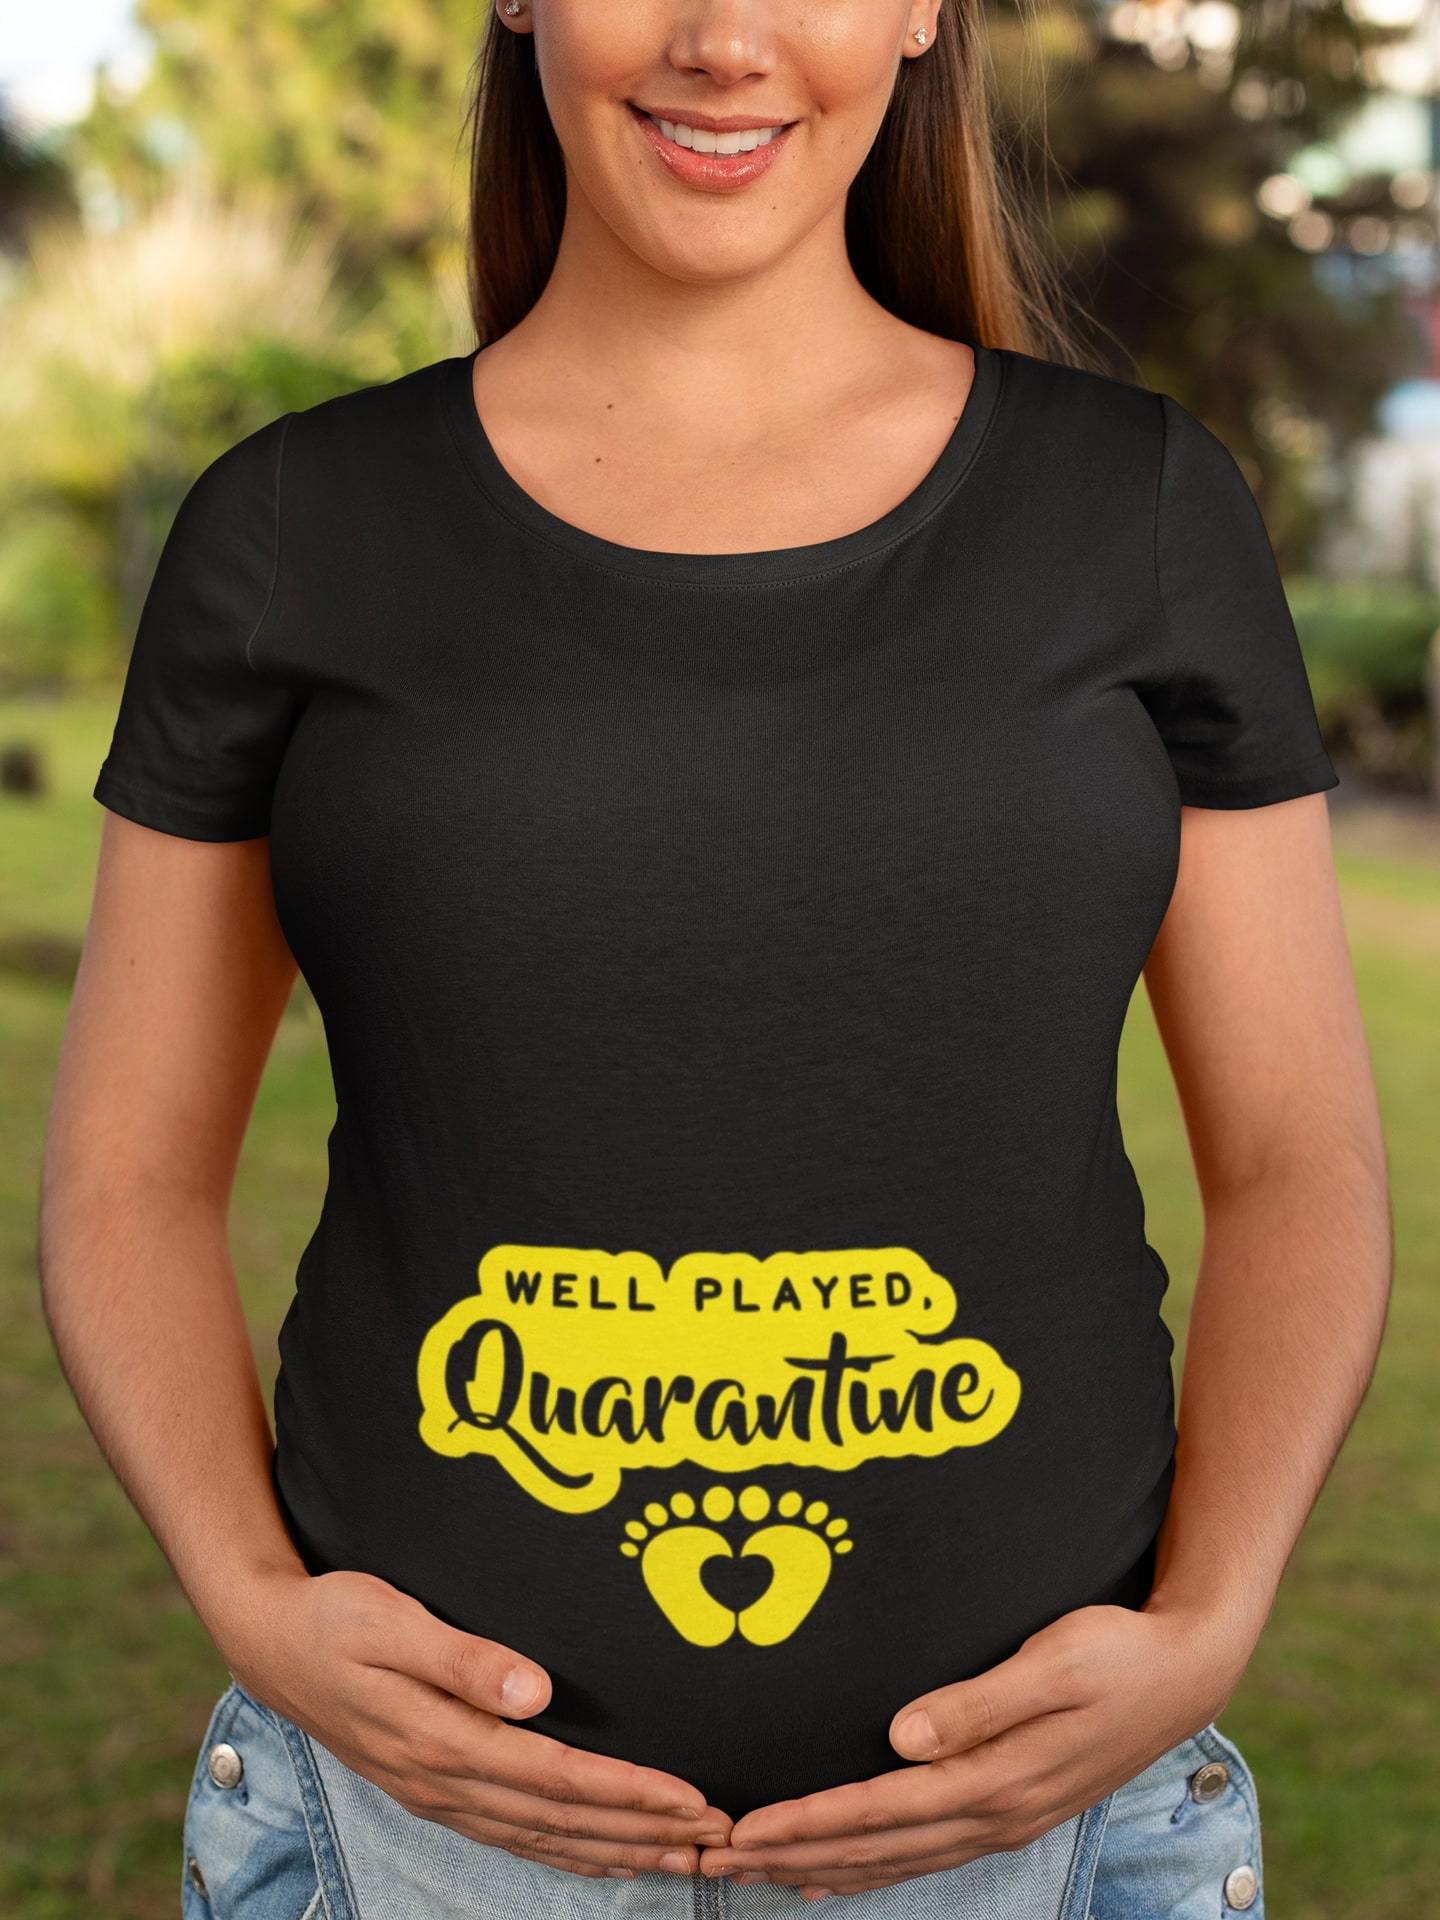 thelegalgang,Funny Well Played Quarantine Graphic Maternity T shirt,WOMEN.